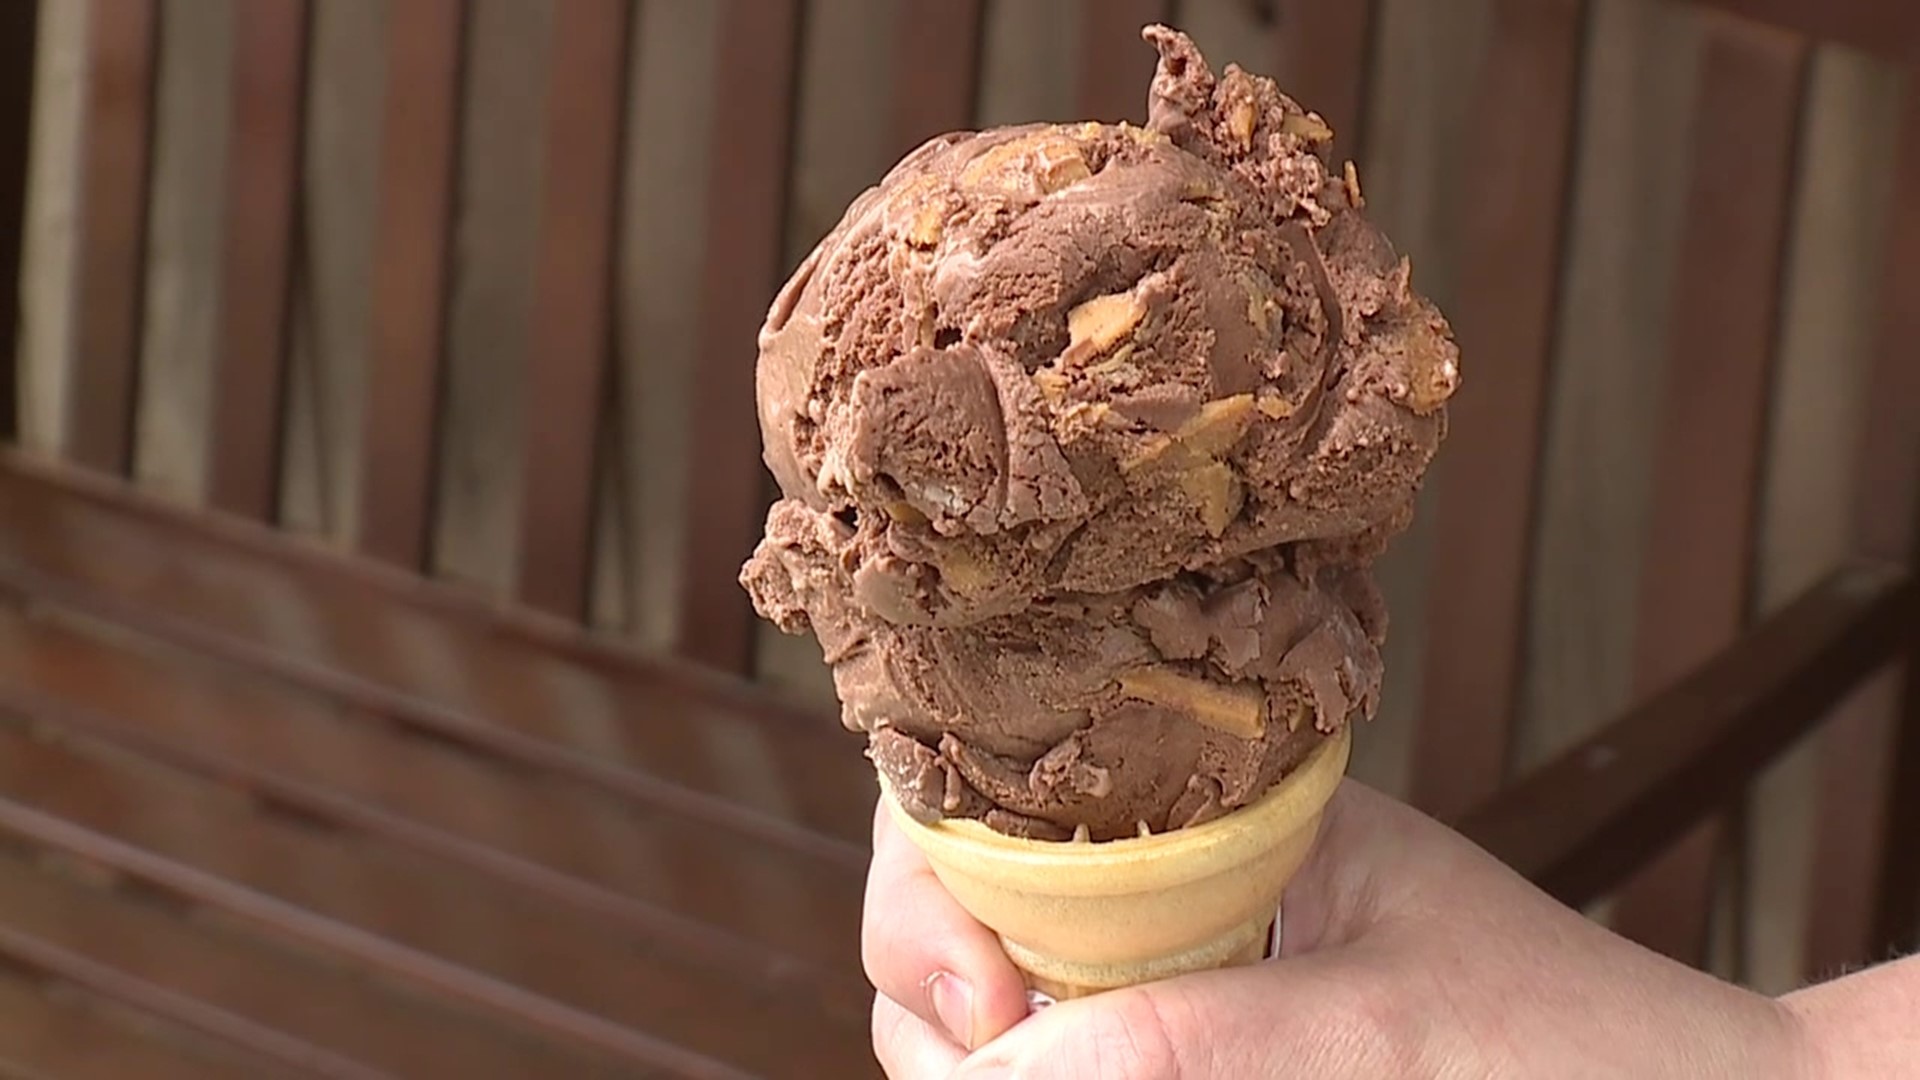 The trail highlights 30 creameries across the state, but what would it cost to visit them all?